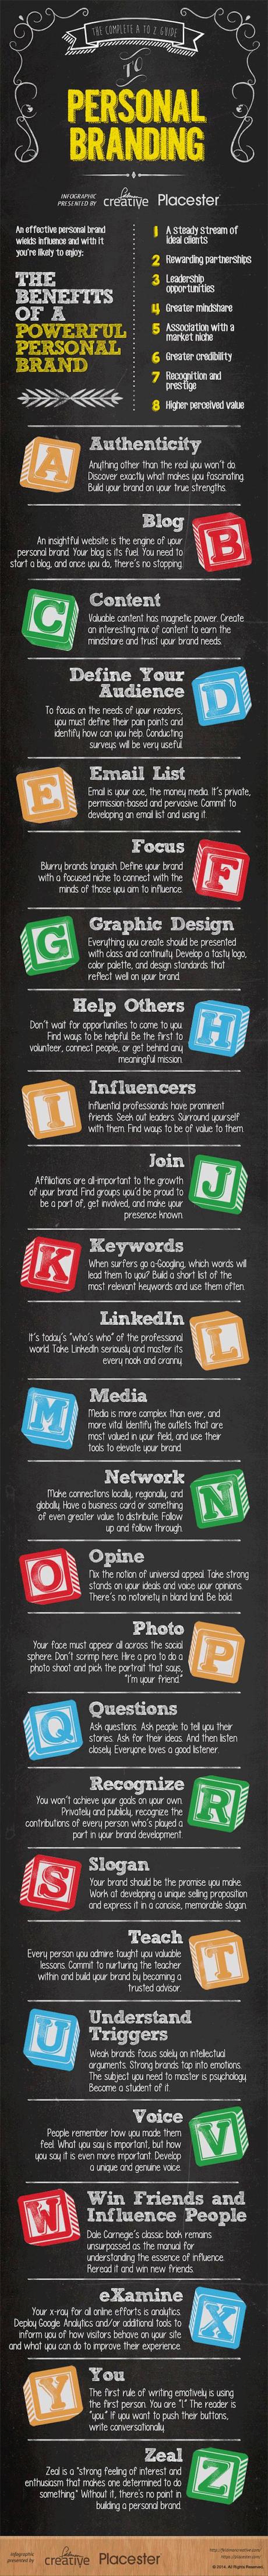 The Complete A to Z Guide to Personal Branding [Infographic]